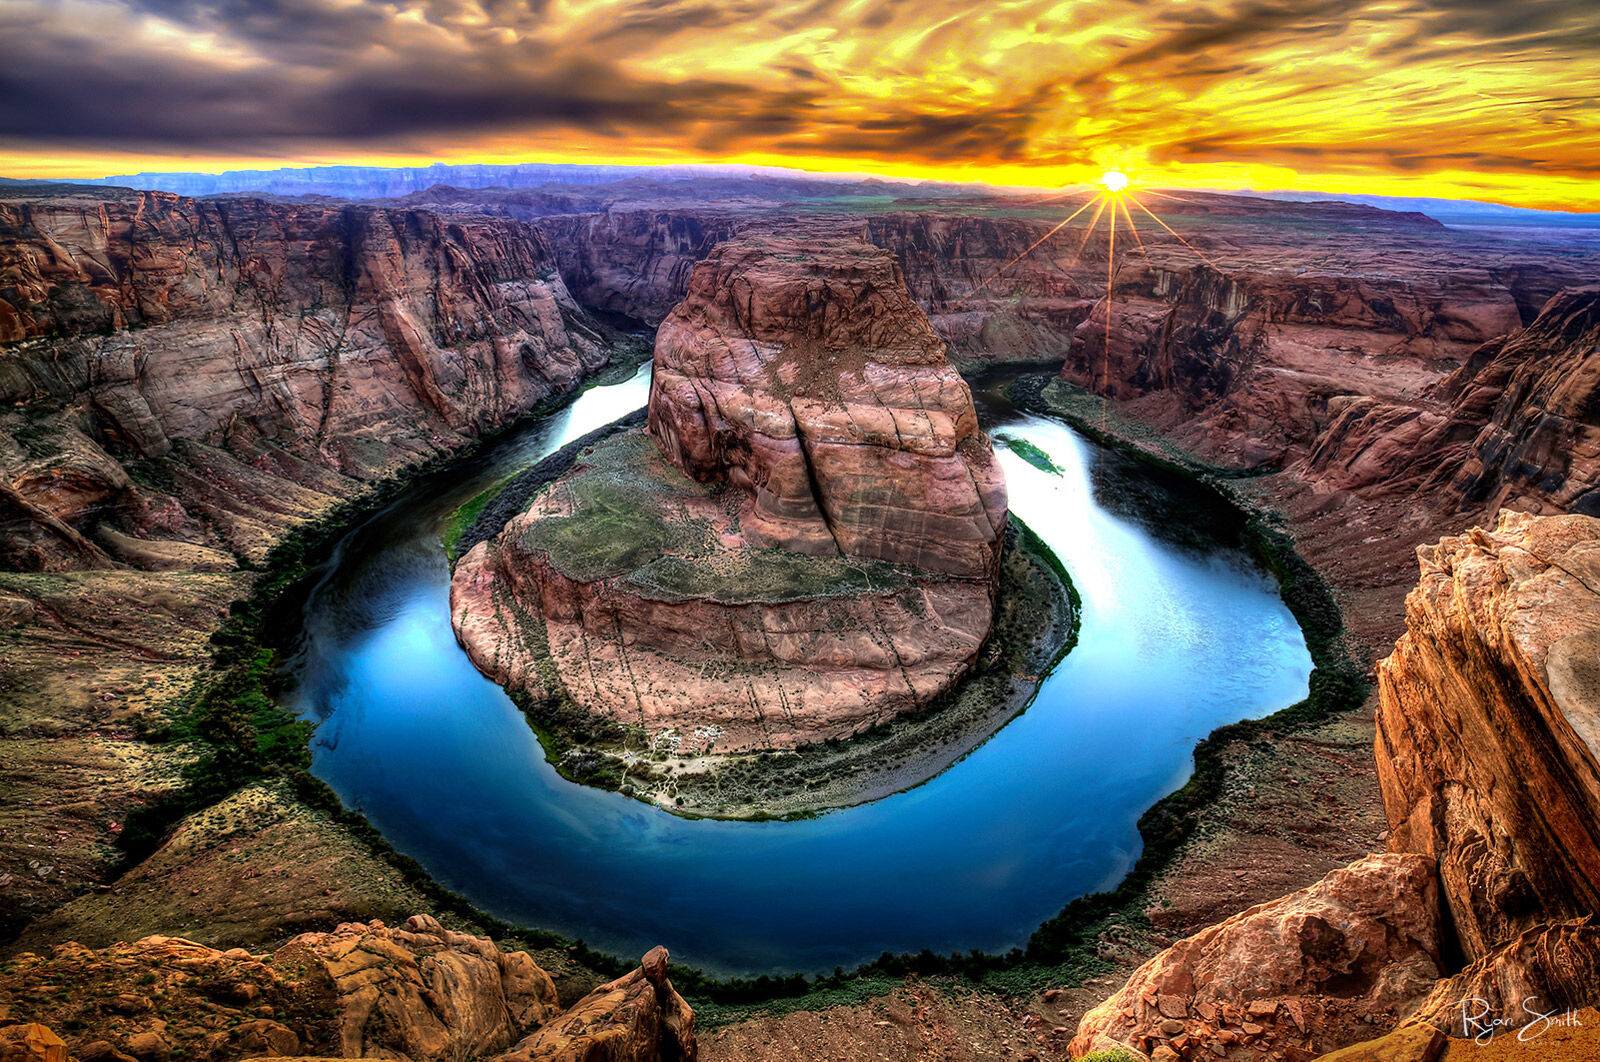 Vibrant sunrise over a large mesa and canyon view where a river bends around in the shape of a horseshoe.